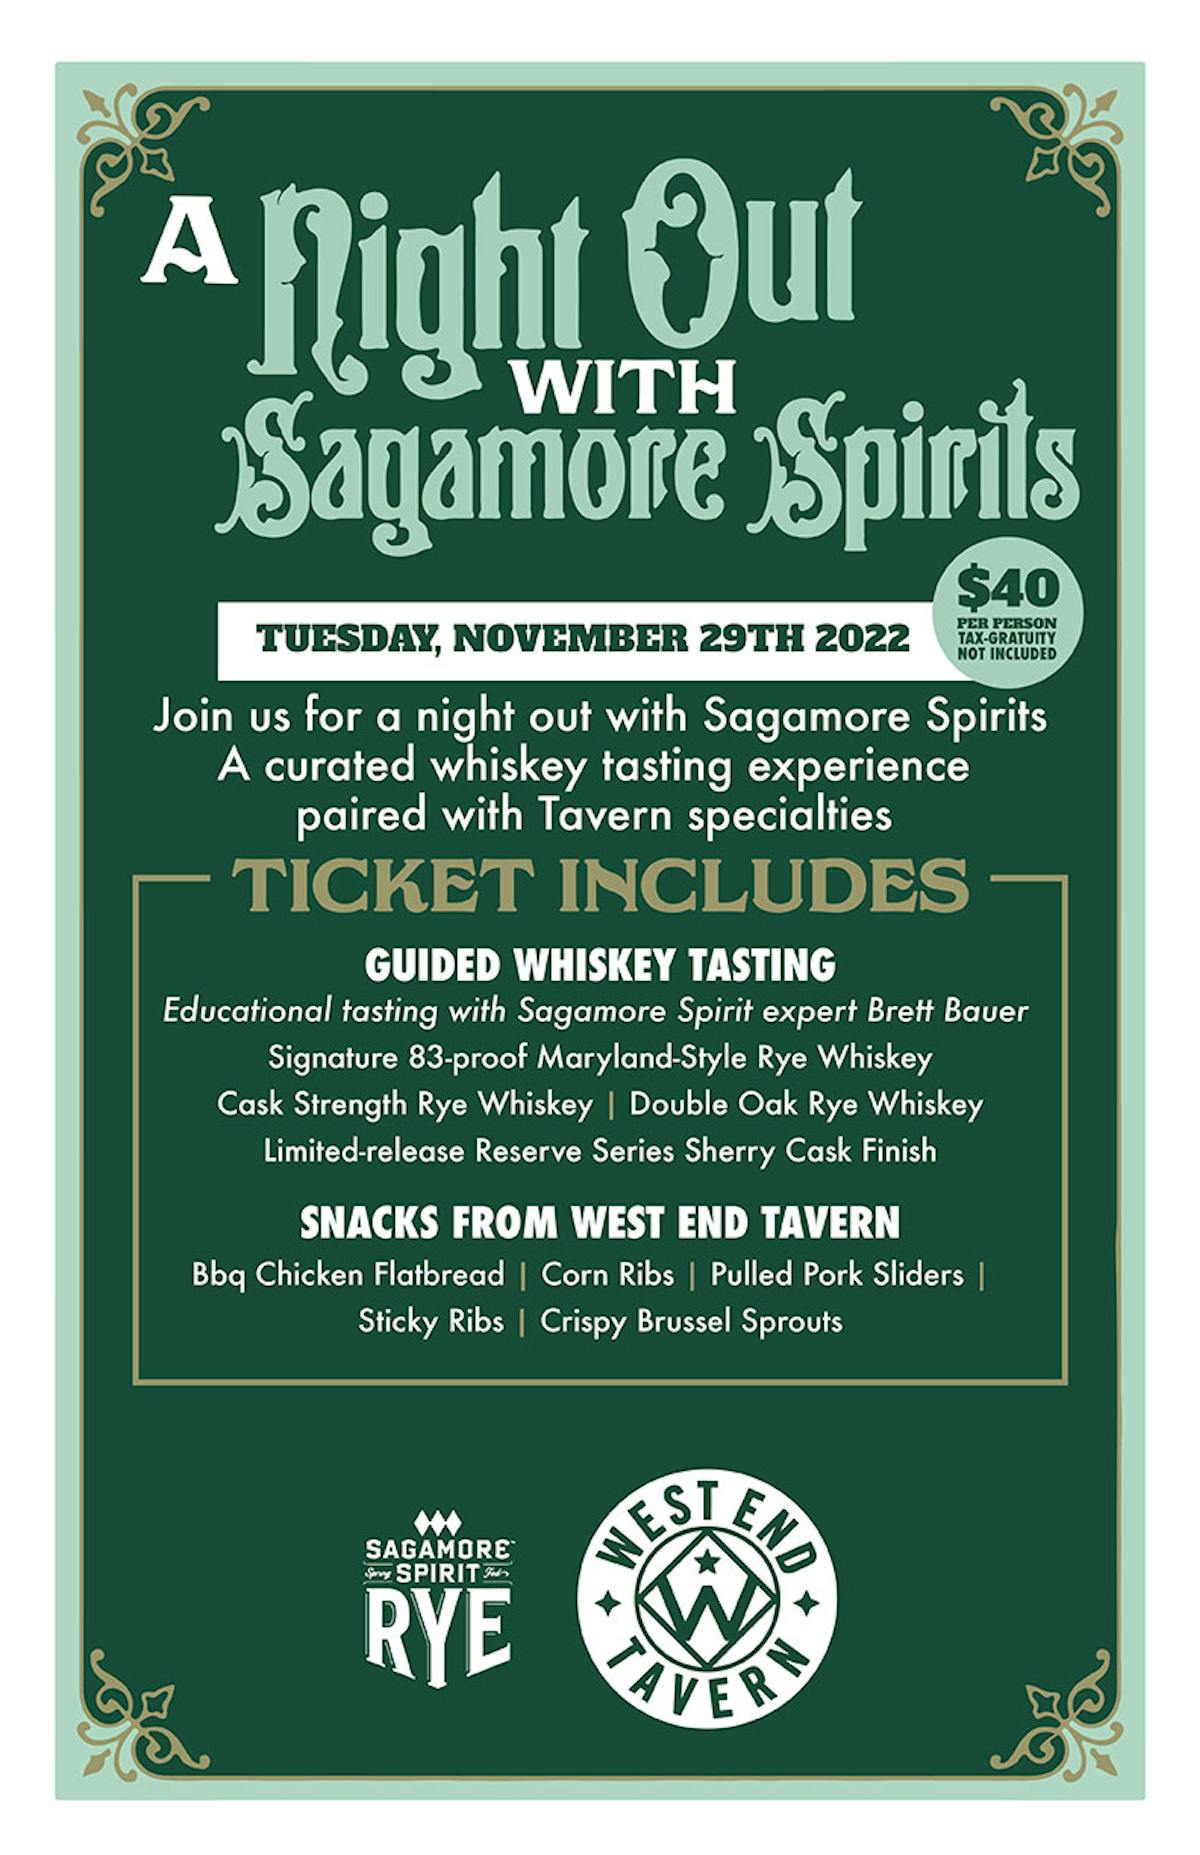 A Night Out with Sagamore Spirits